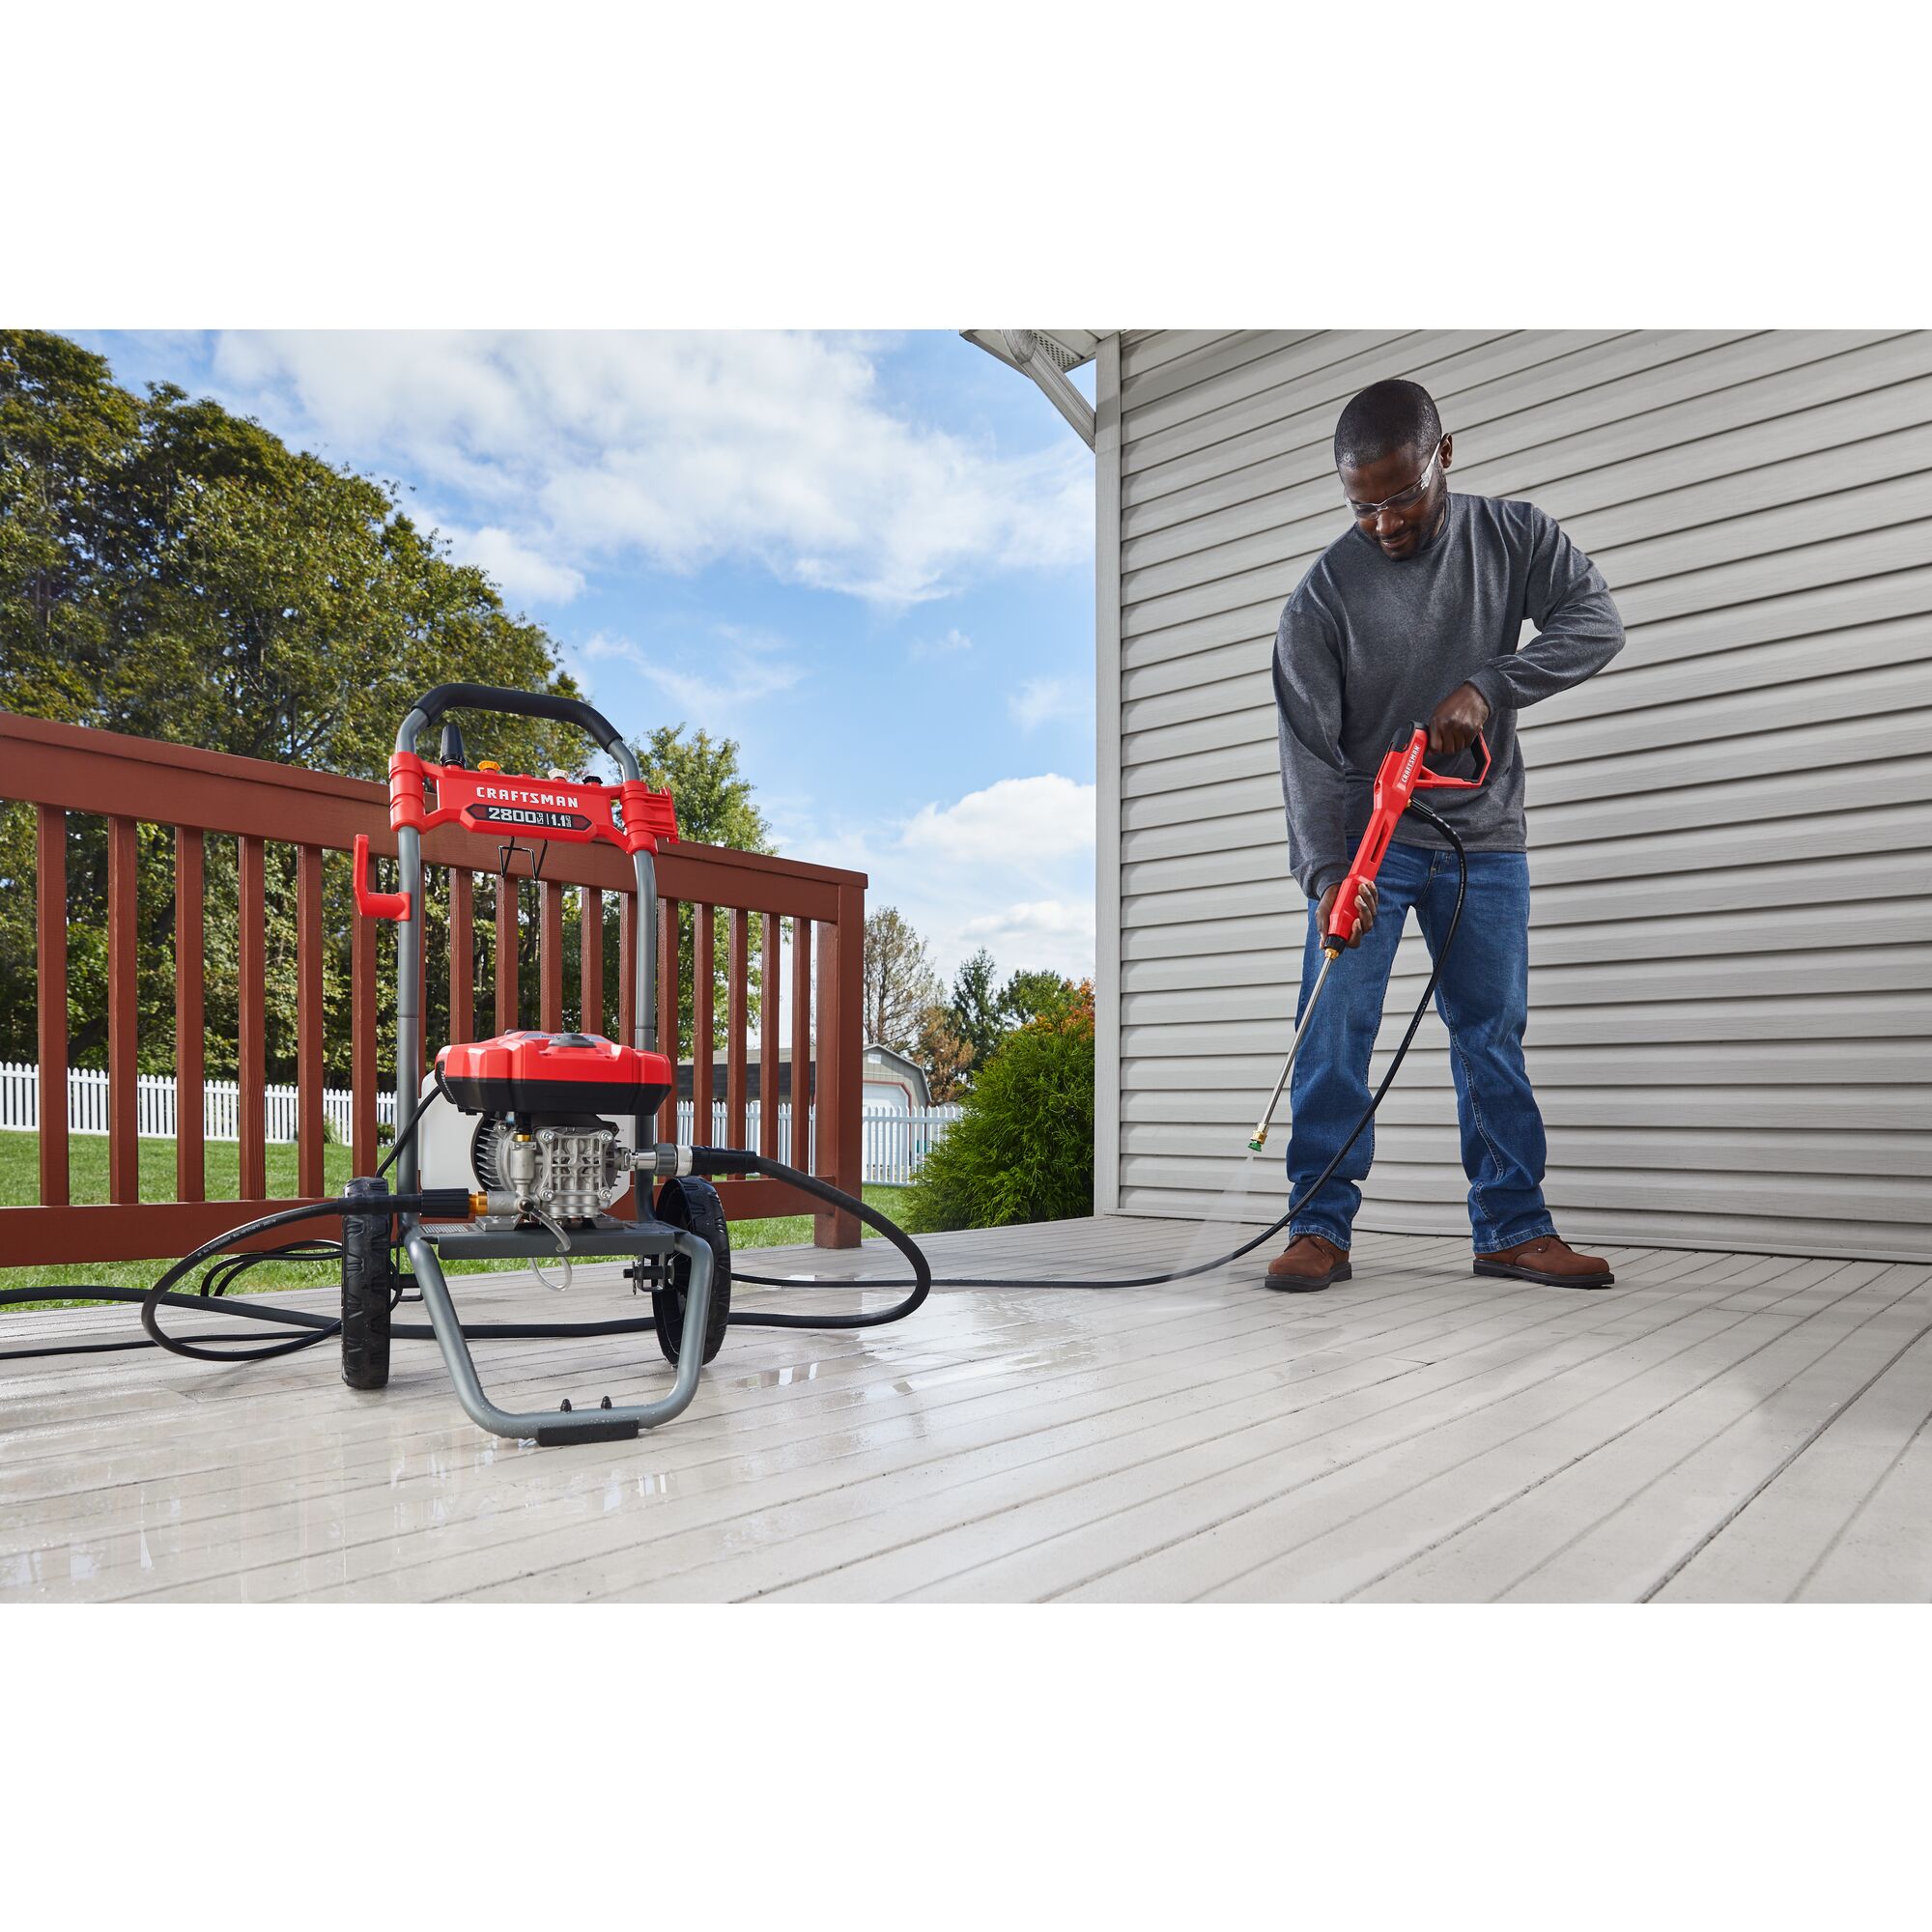 CRAFTSMAN 2800 Pressure Washer pressure washing outside deck with shed and trees in background